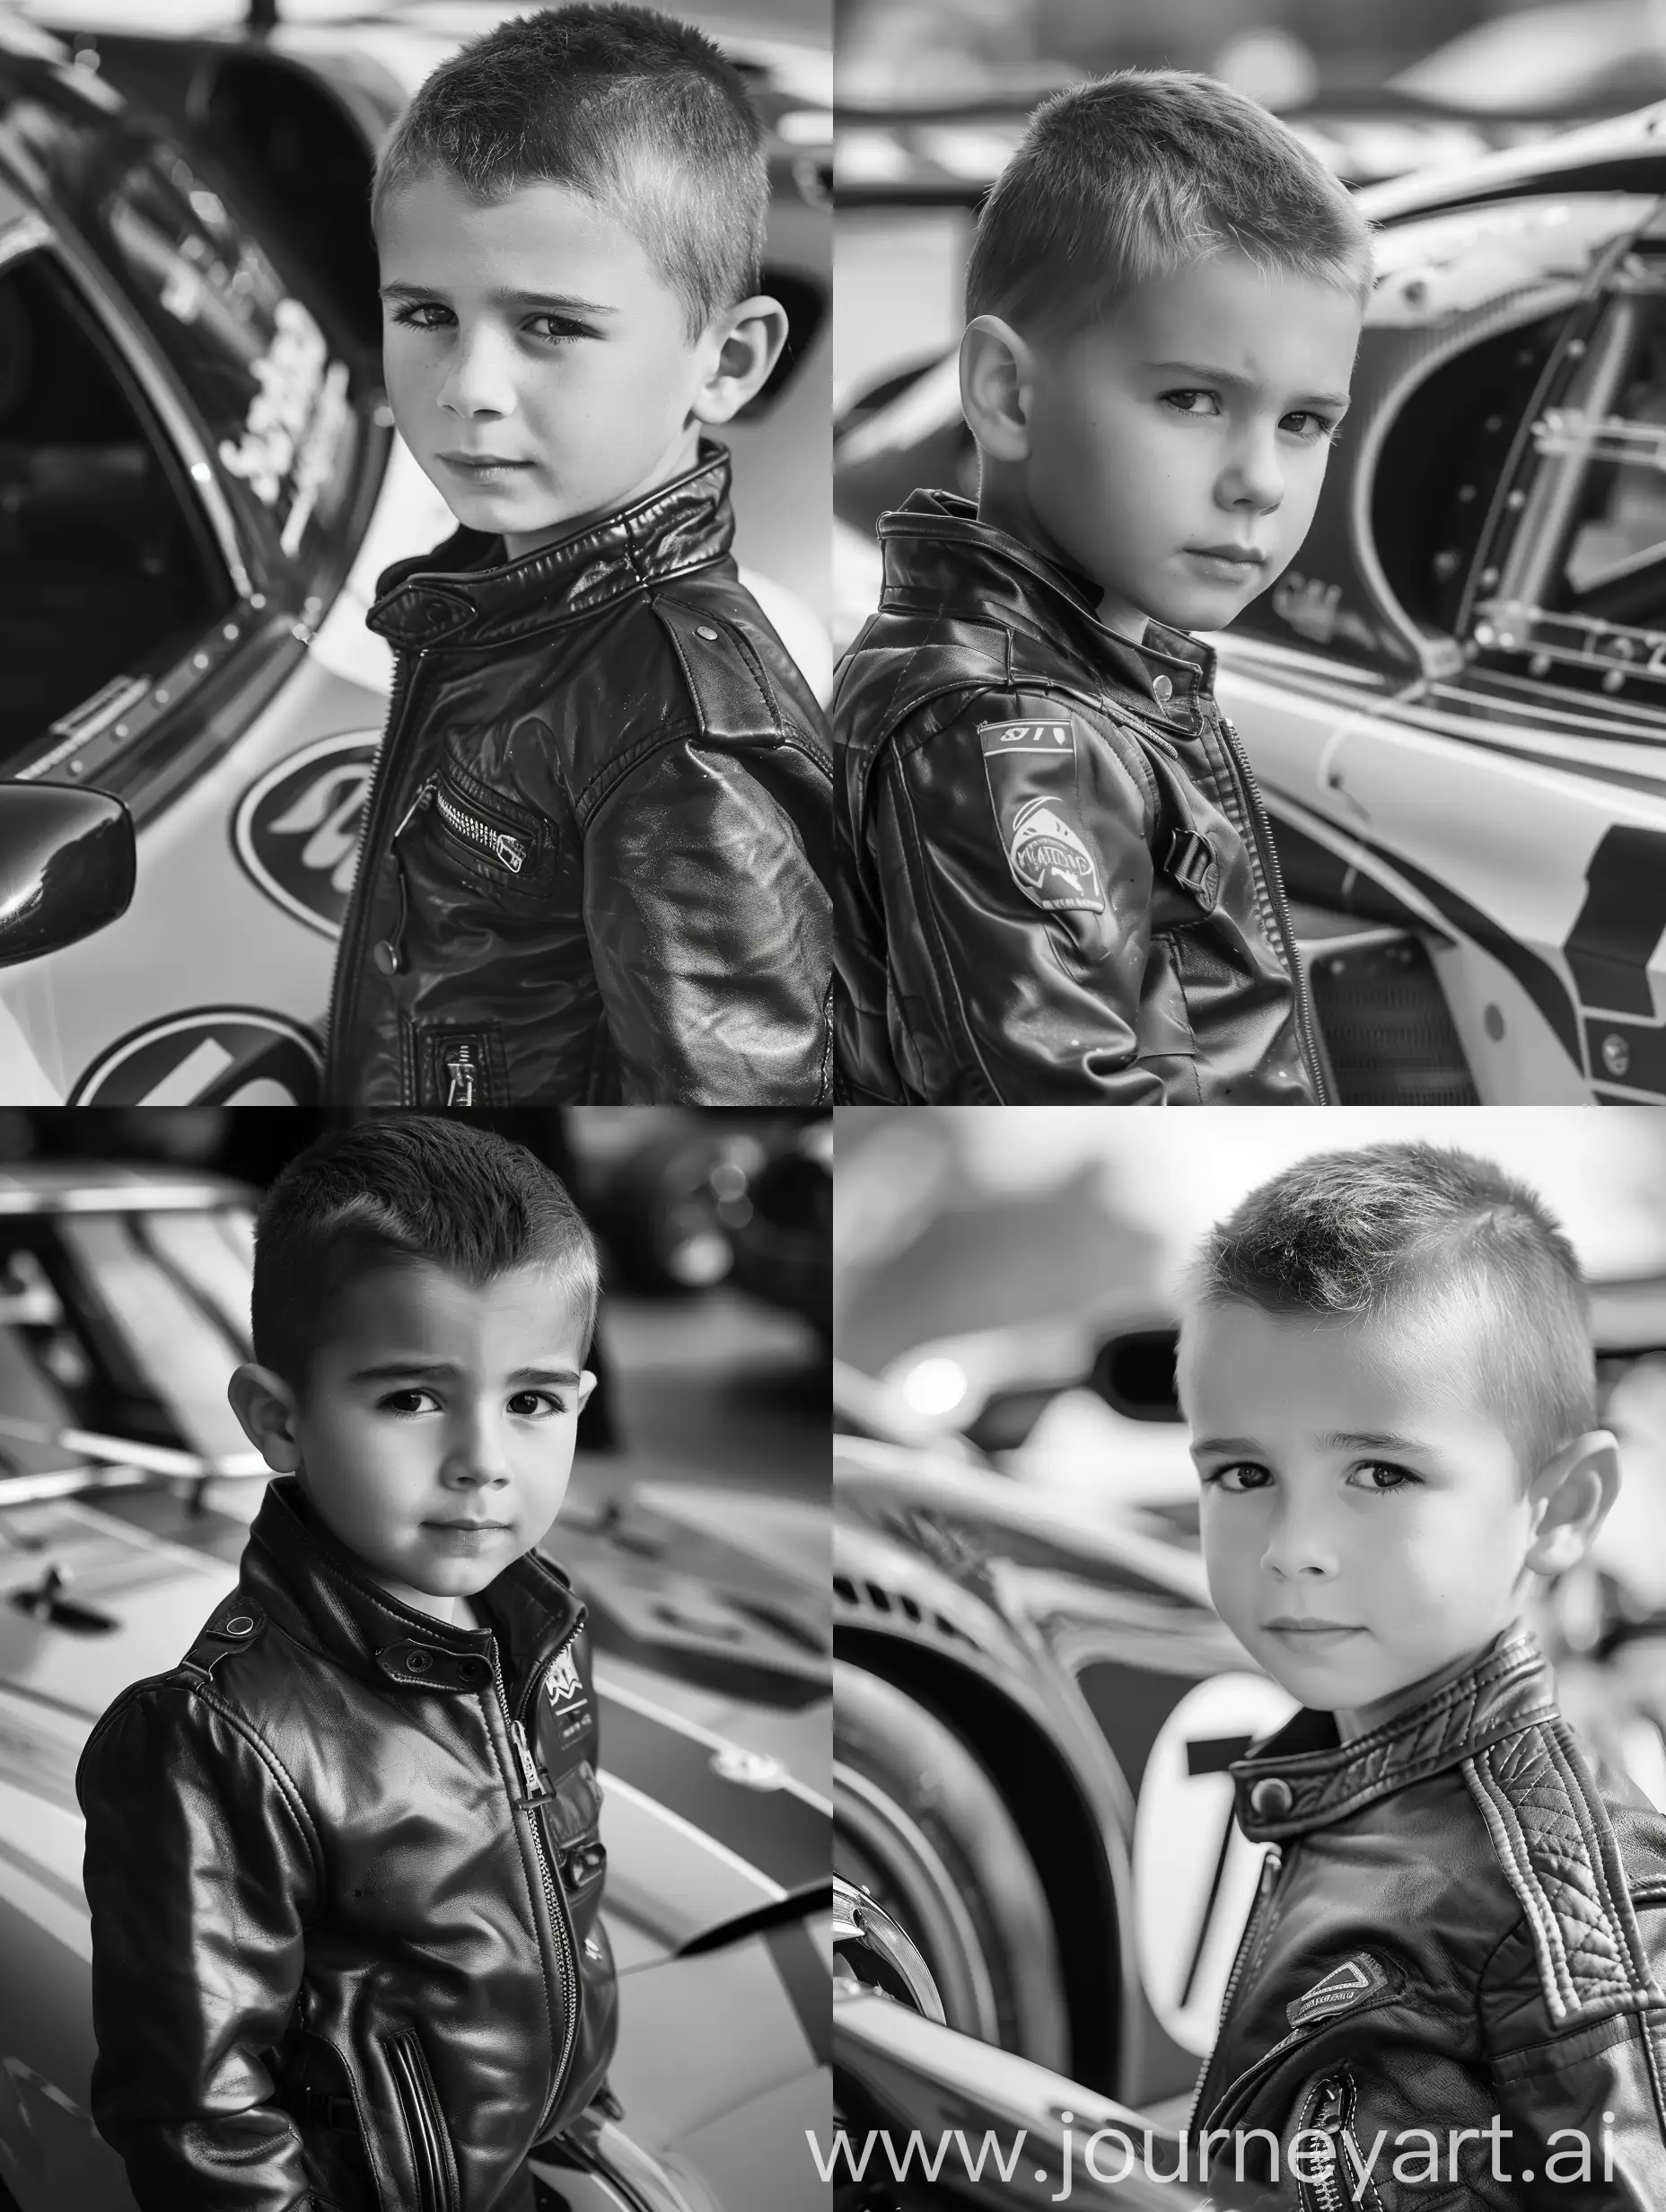 A little boy with short hair, wearing a leather jacket, seven years old, stands next to a cool tuned racing car, realistic photo, hyperrealism, face is clearly visible, looks at the camera, wide angle